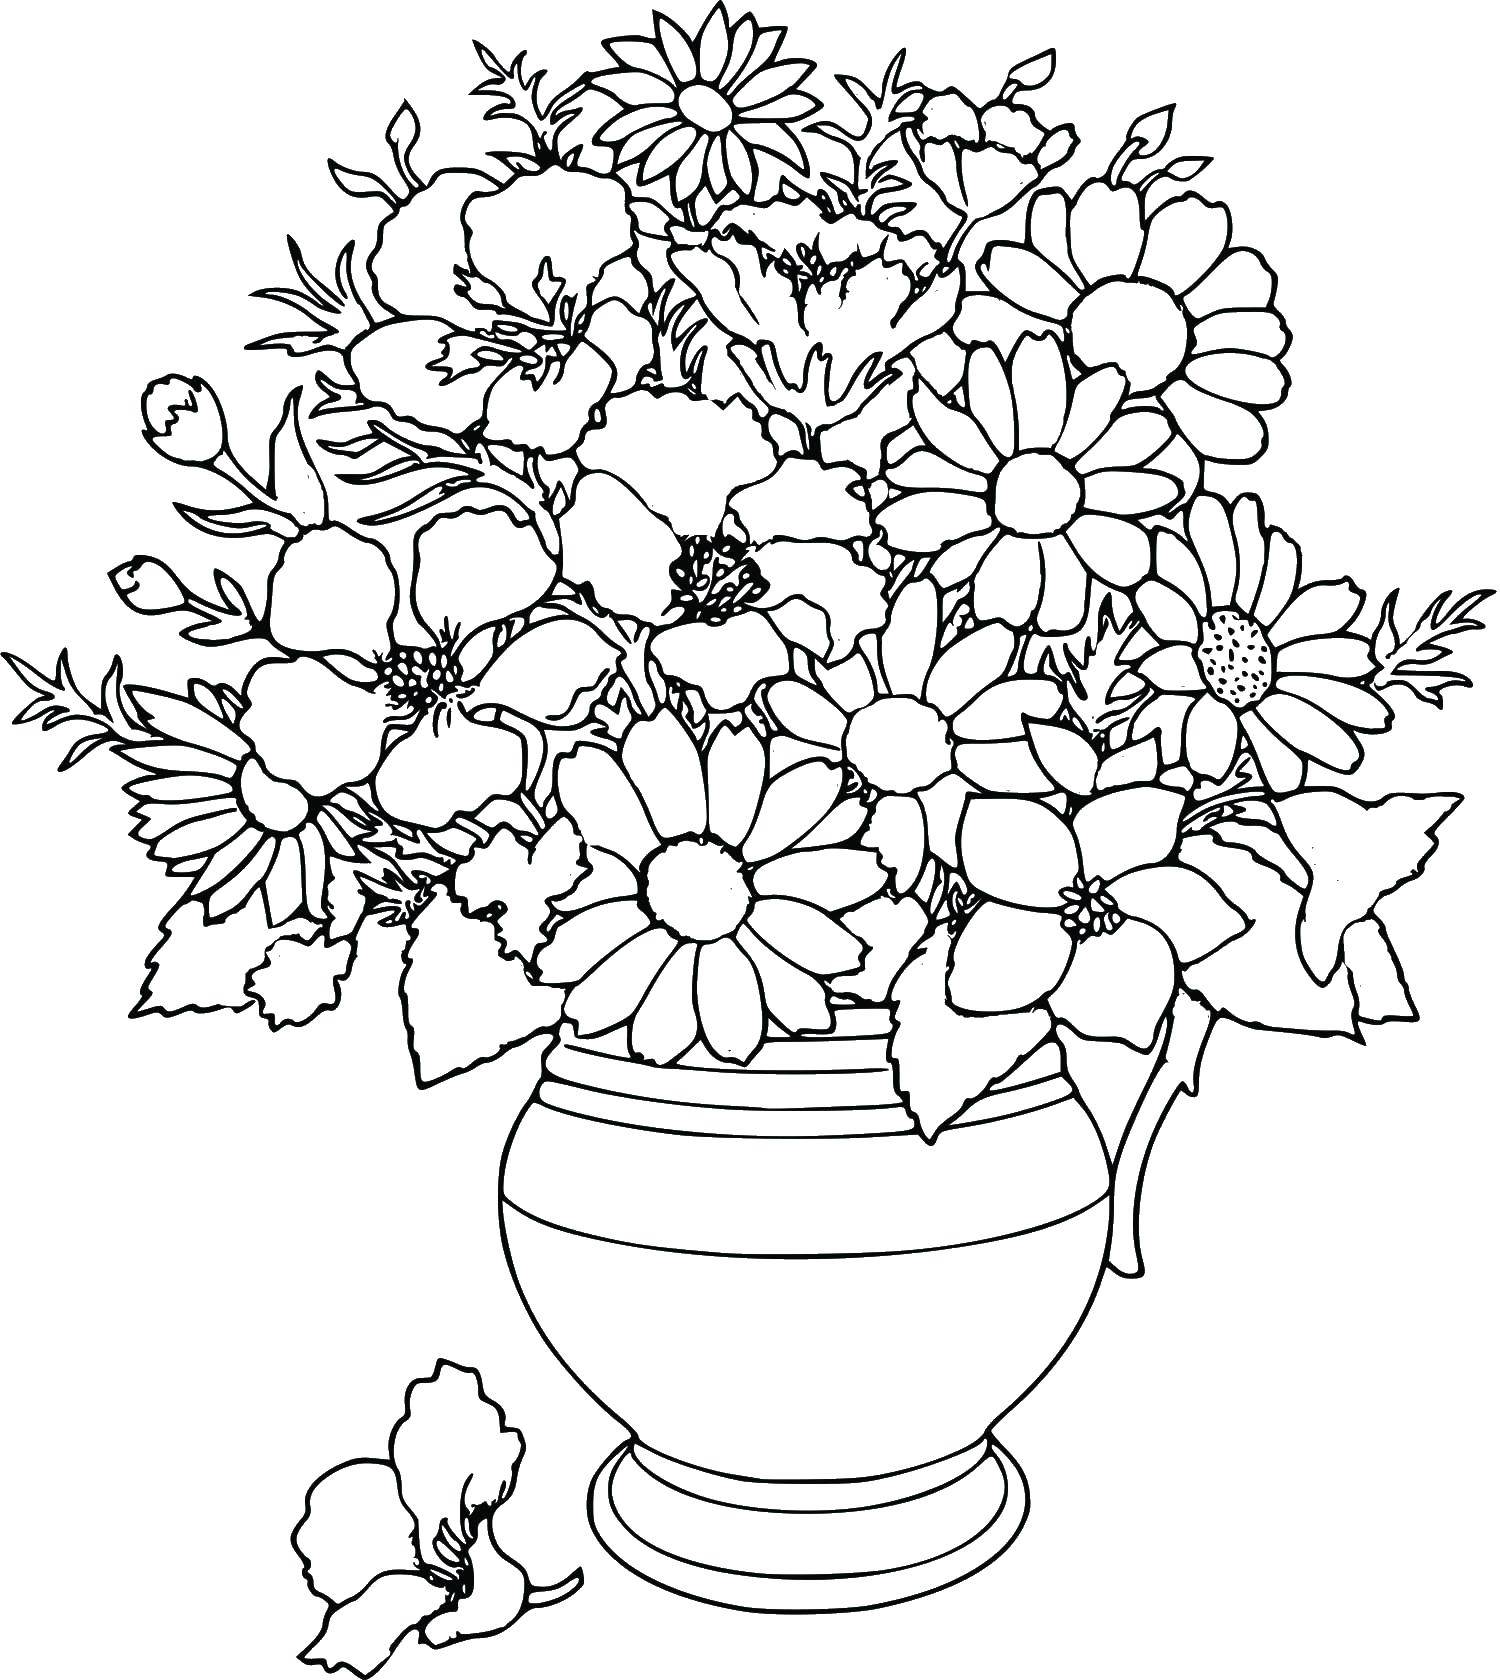 Coloring A beautiful bouquet in a vase. Category Flowers. Tags:  Flowers, bouquet, vase.